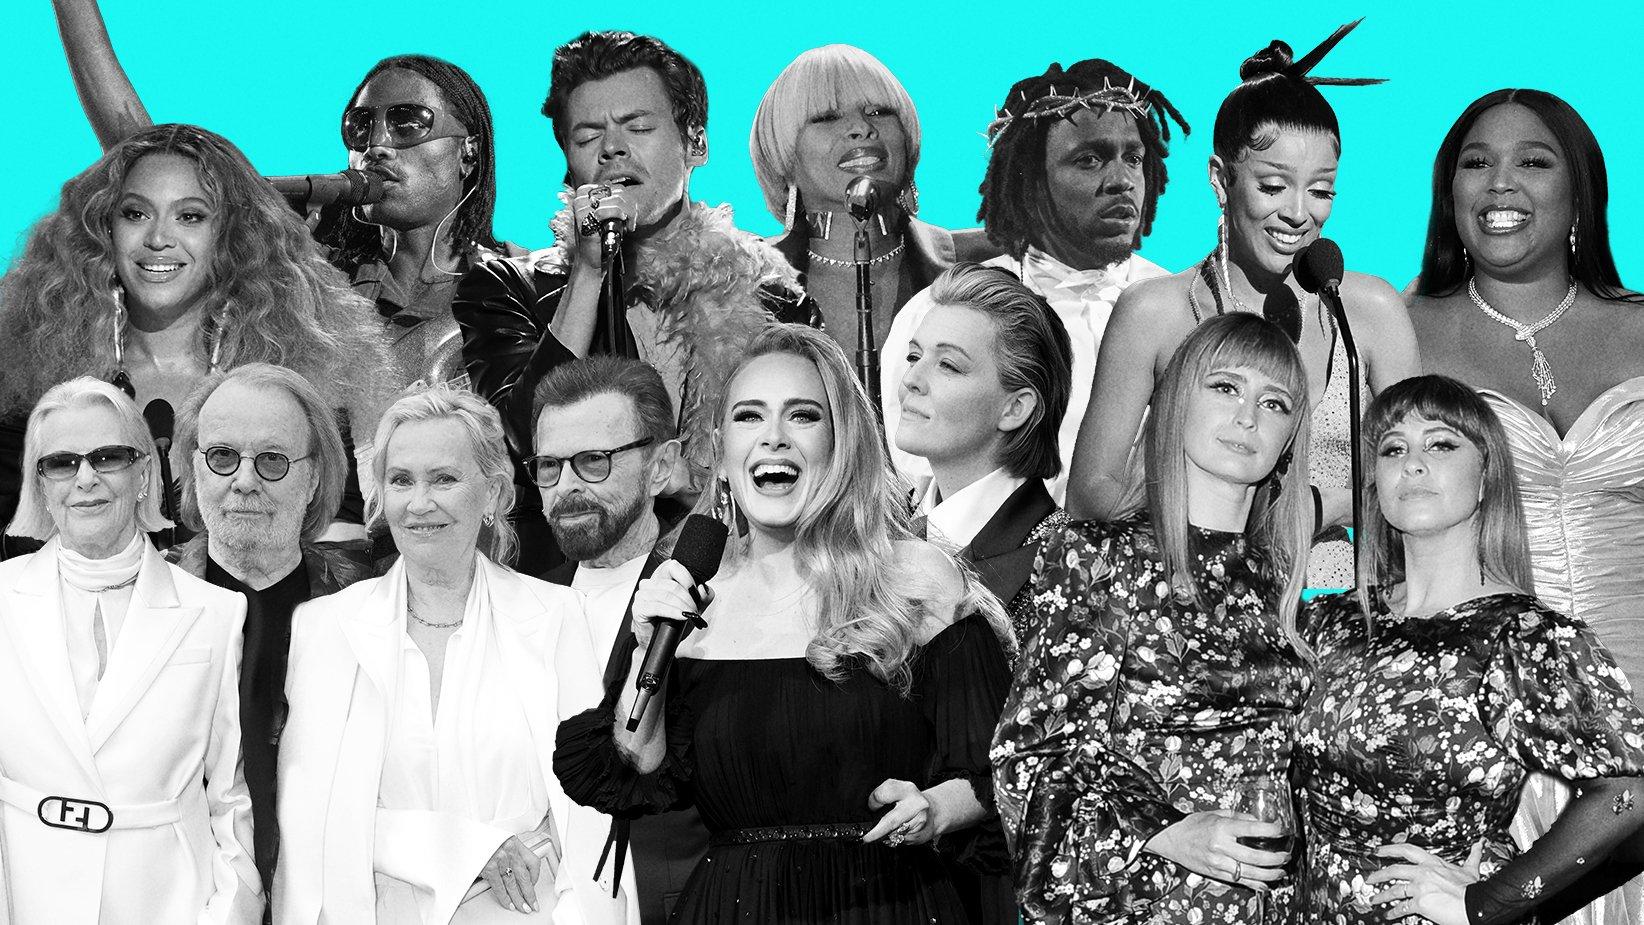 Meet The Record Of The Year Nominees At The 2023 GRAMMYs